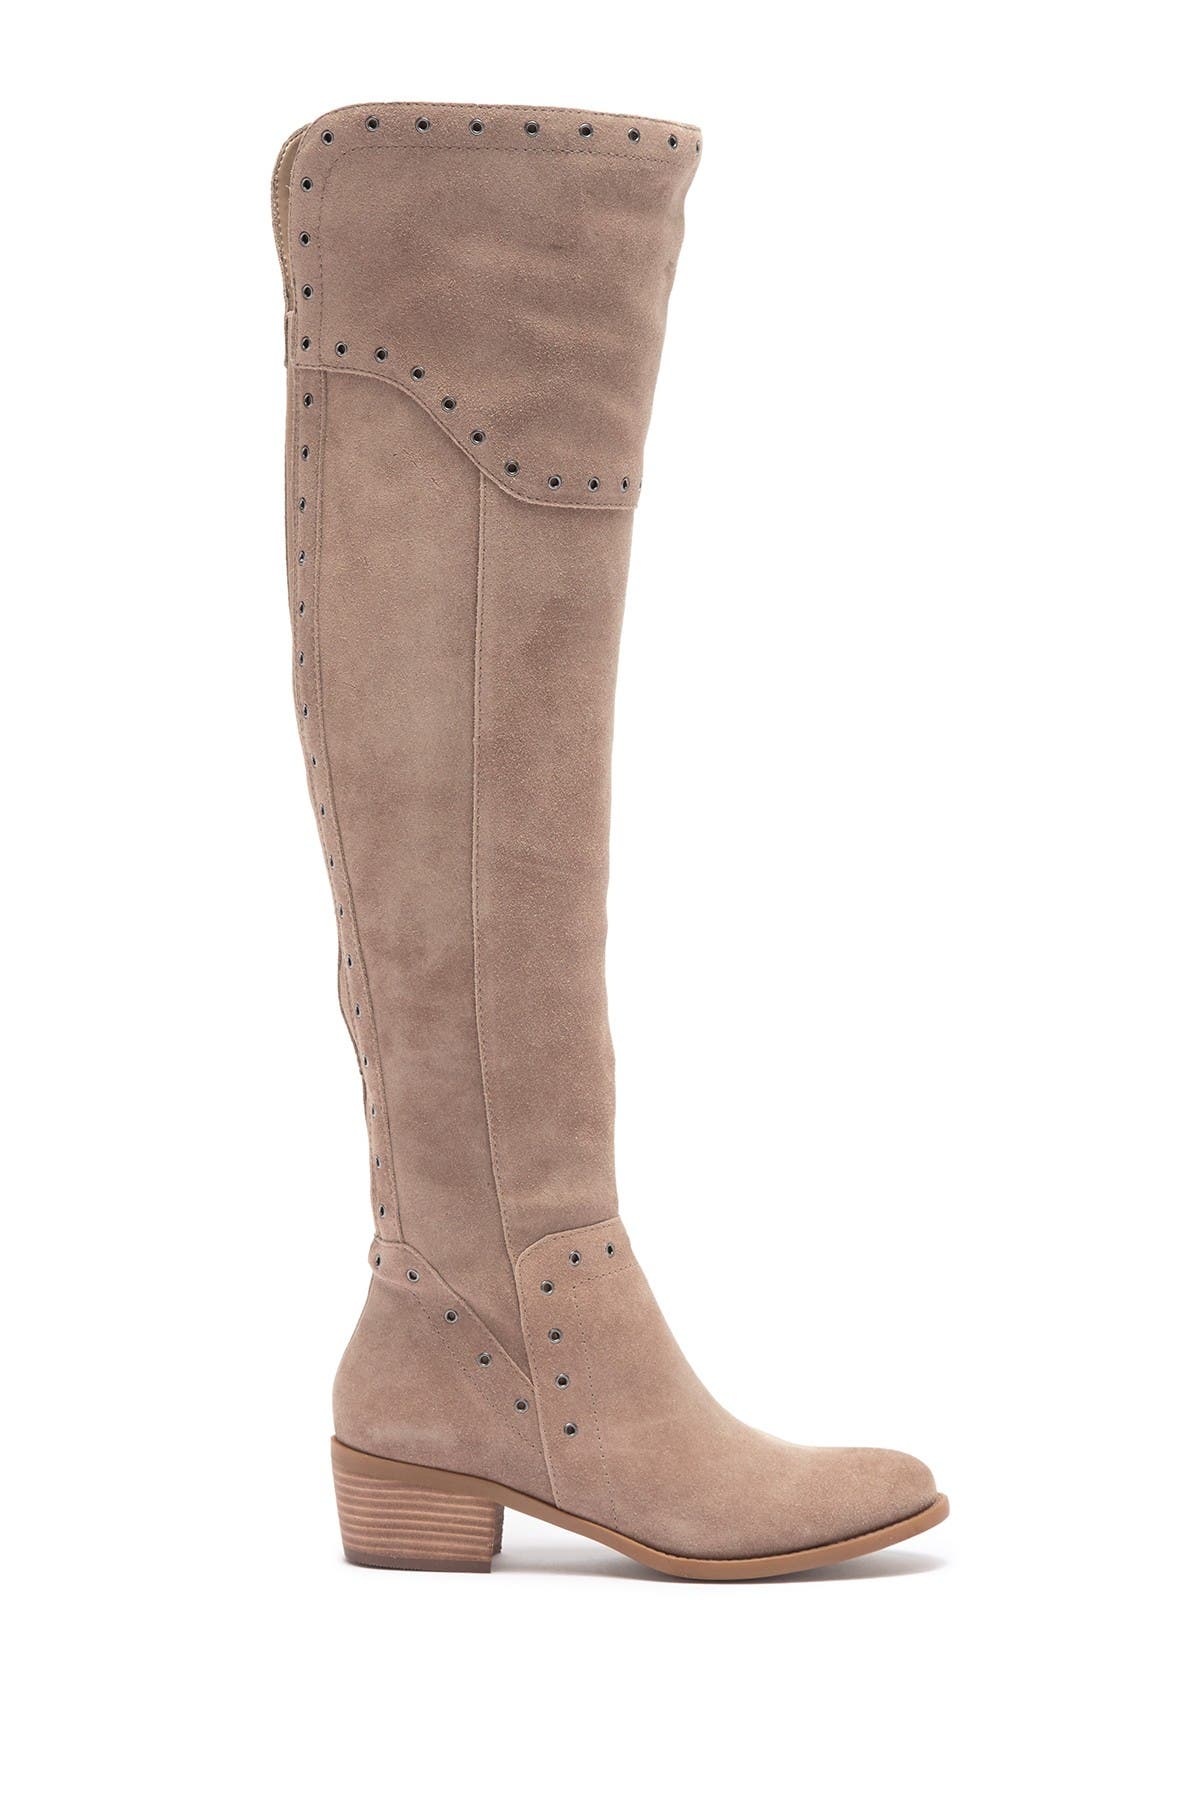 vince camuto bestan over the knee boot